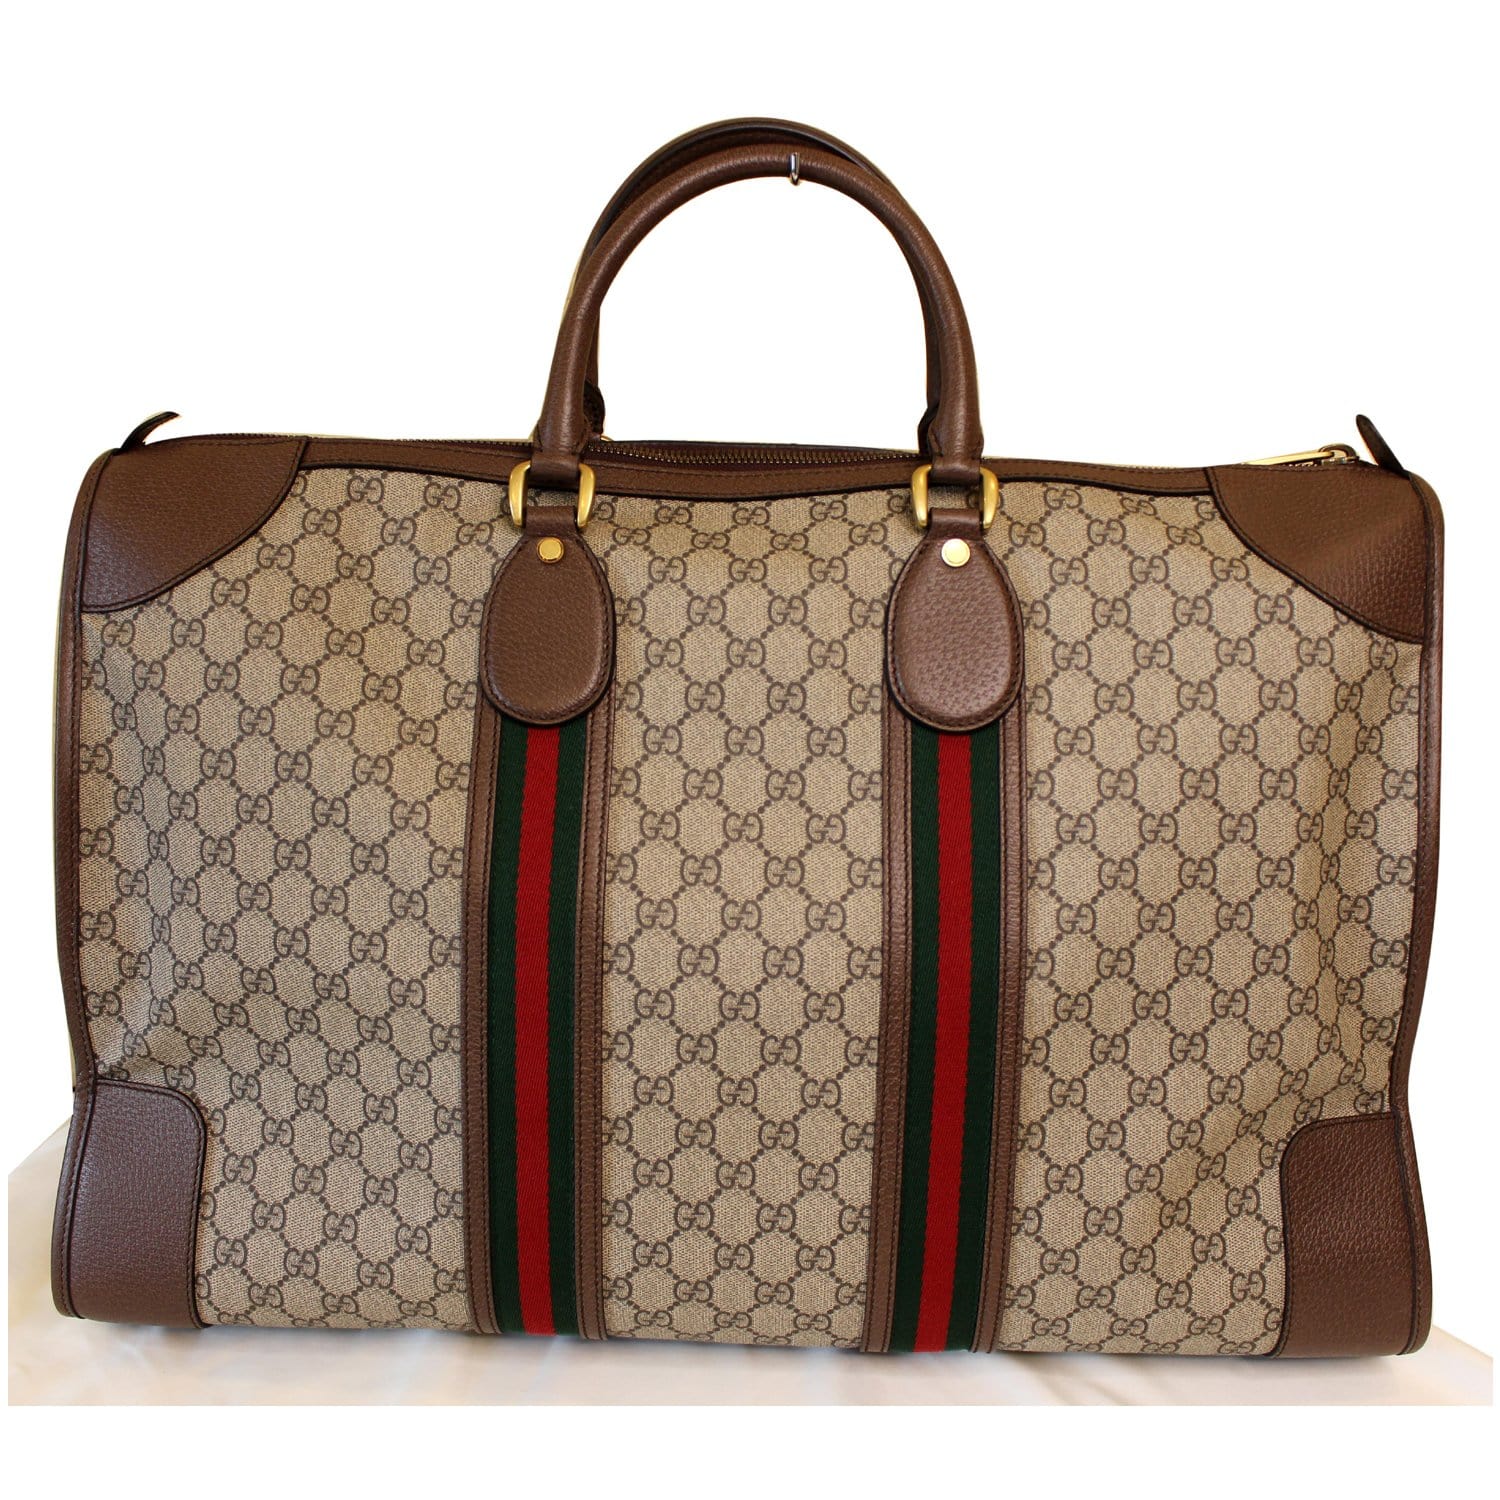 gucci ophidia duffle